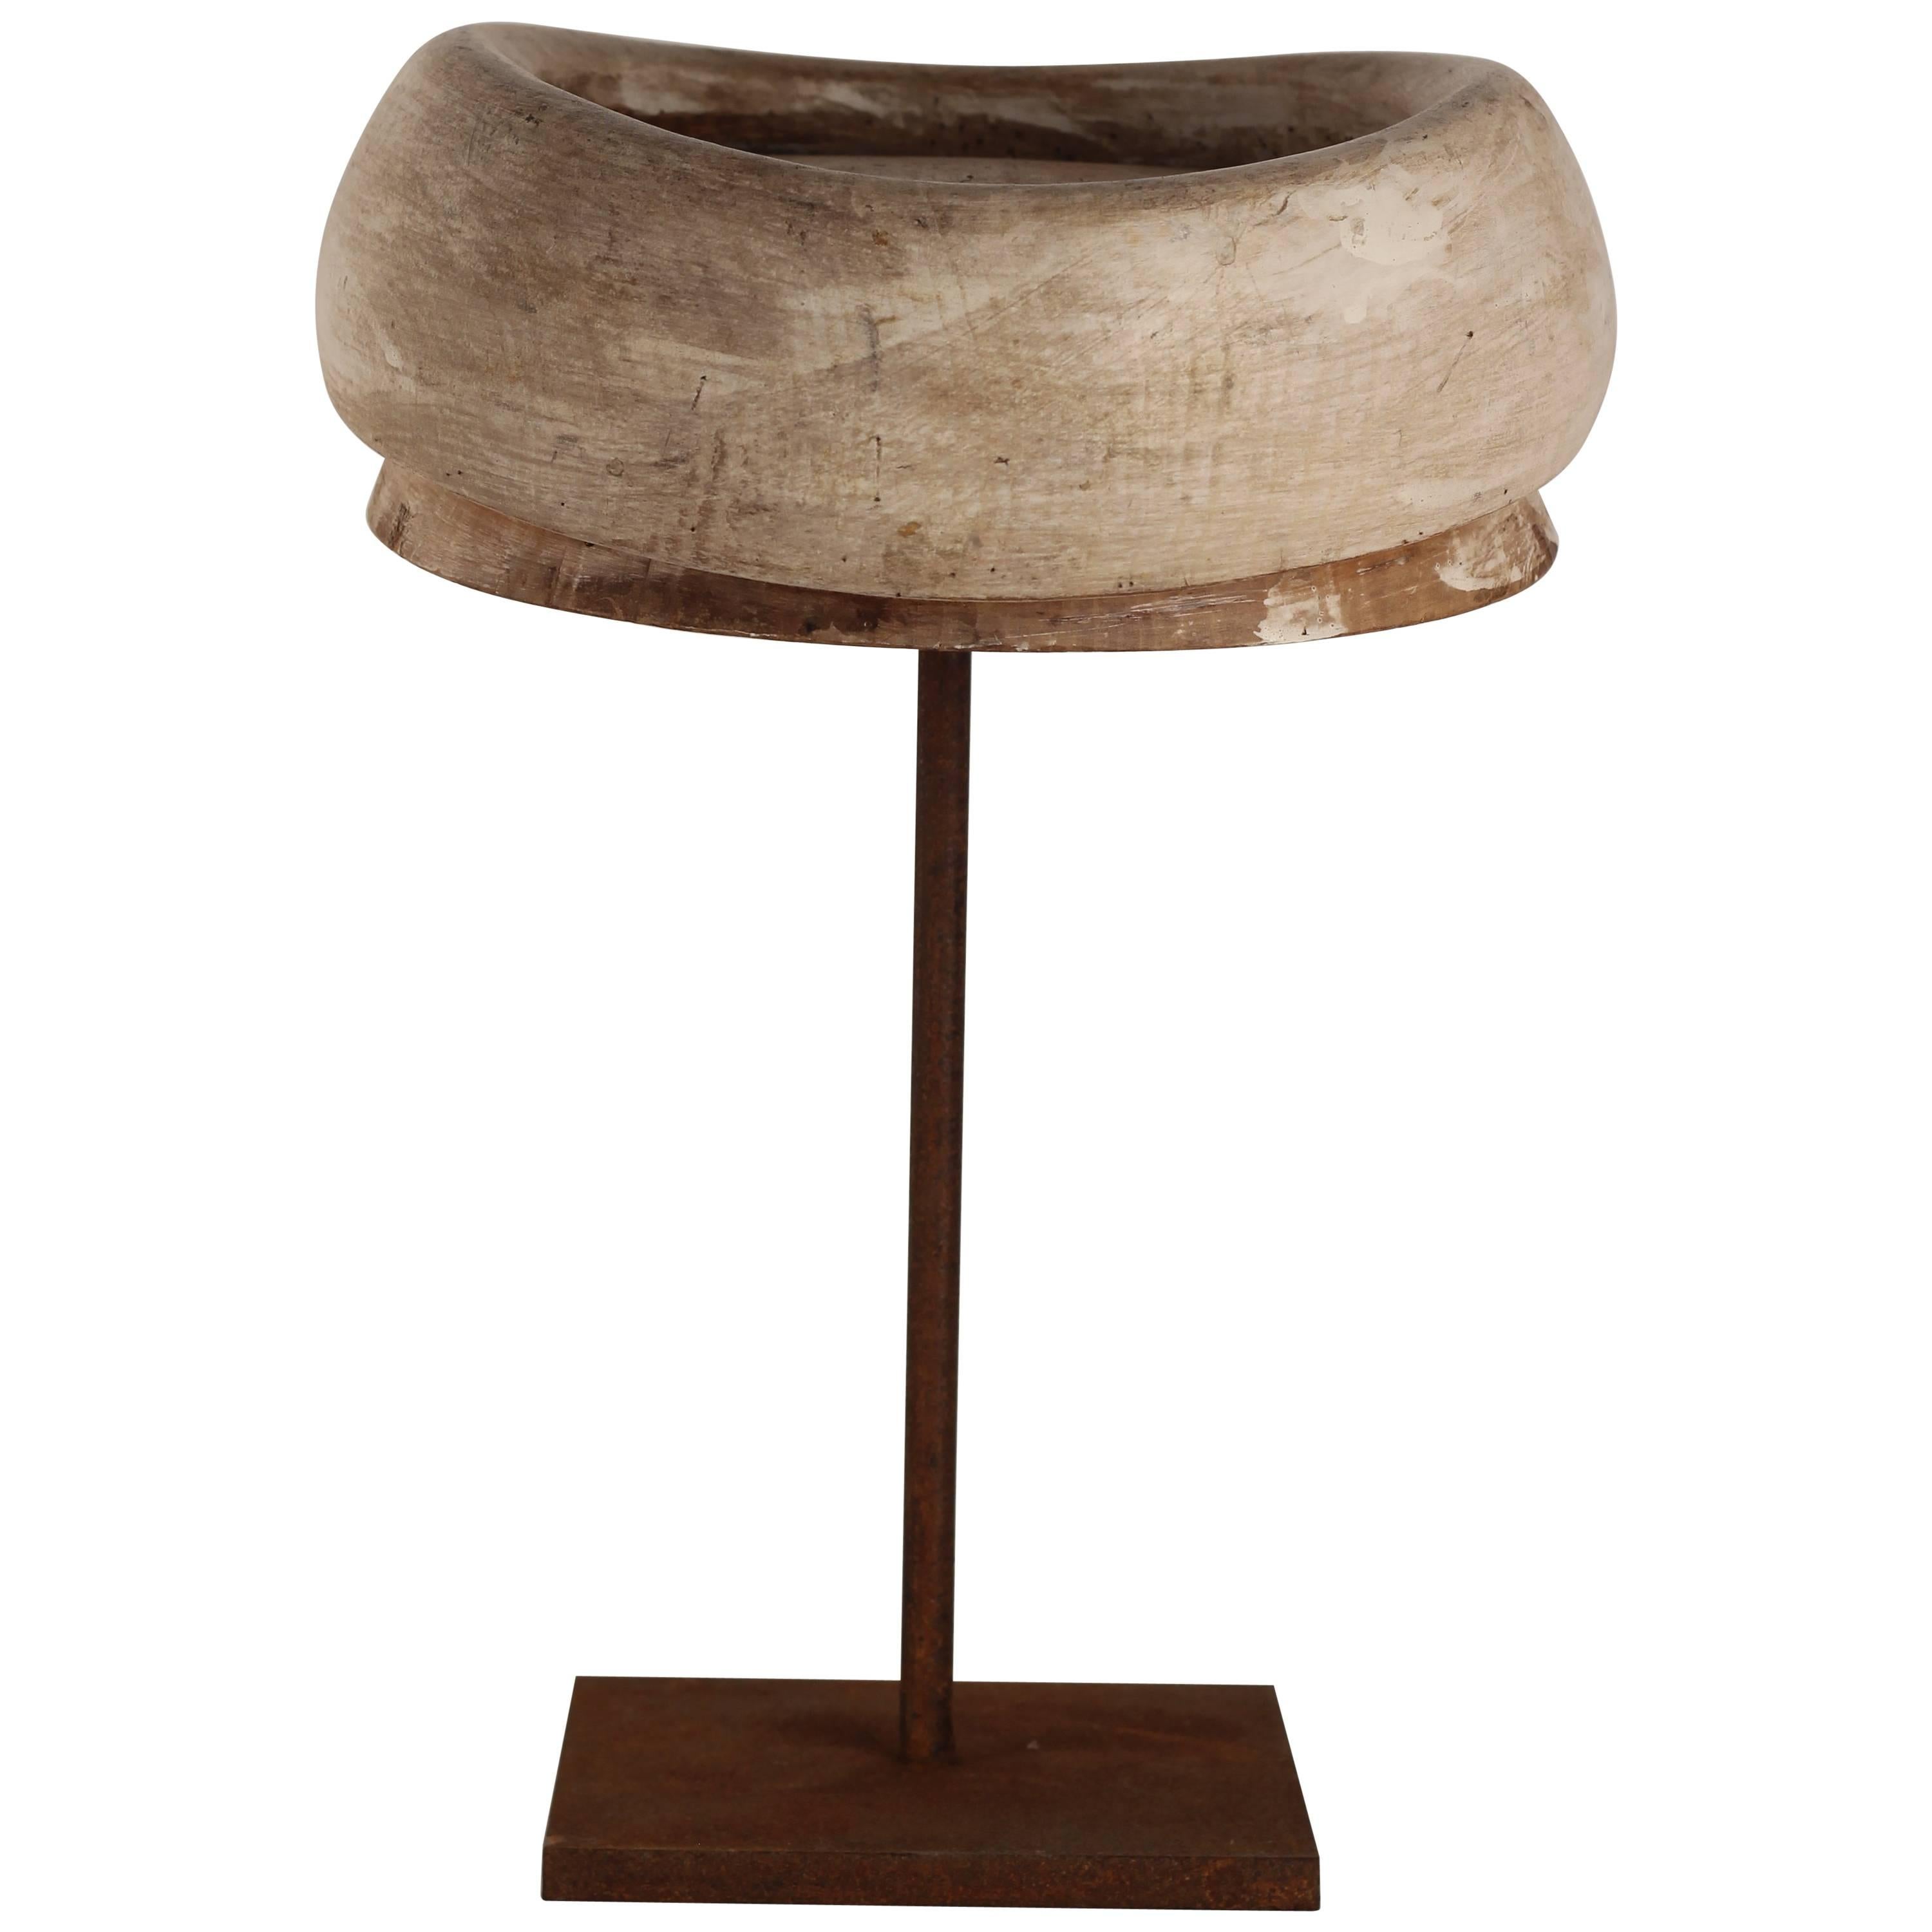 Early 20th Century Milliner Wooden Hat Block from Florence, Italy